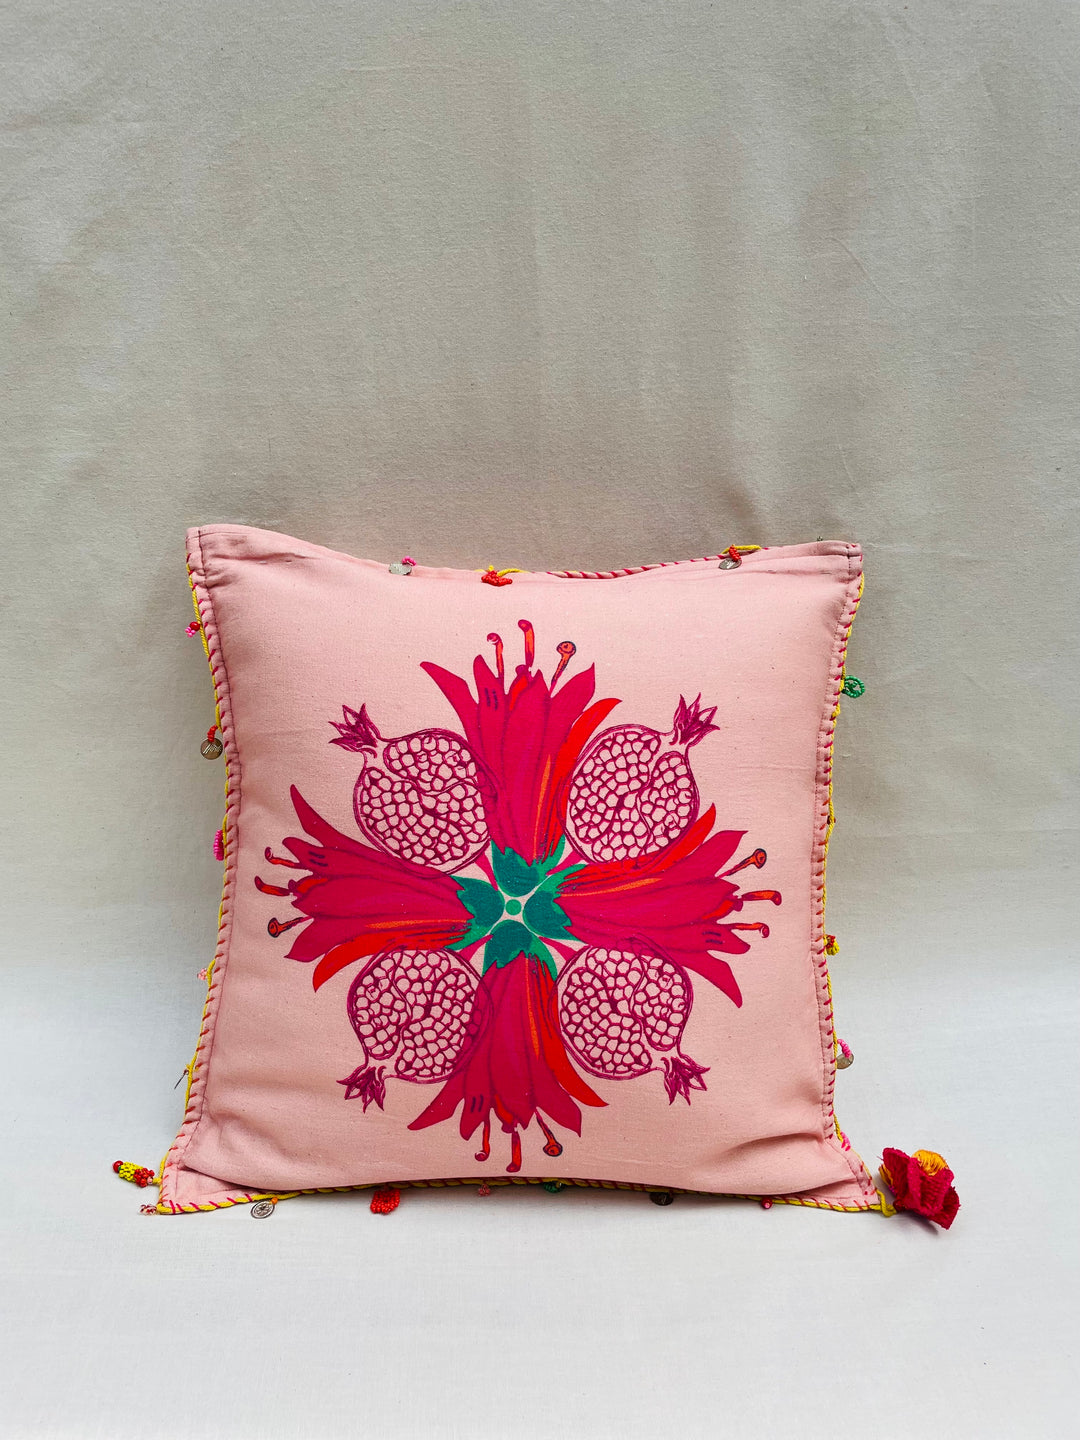 Hand-Embellished Pomegranate Throw Pillow Cover